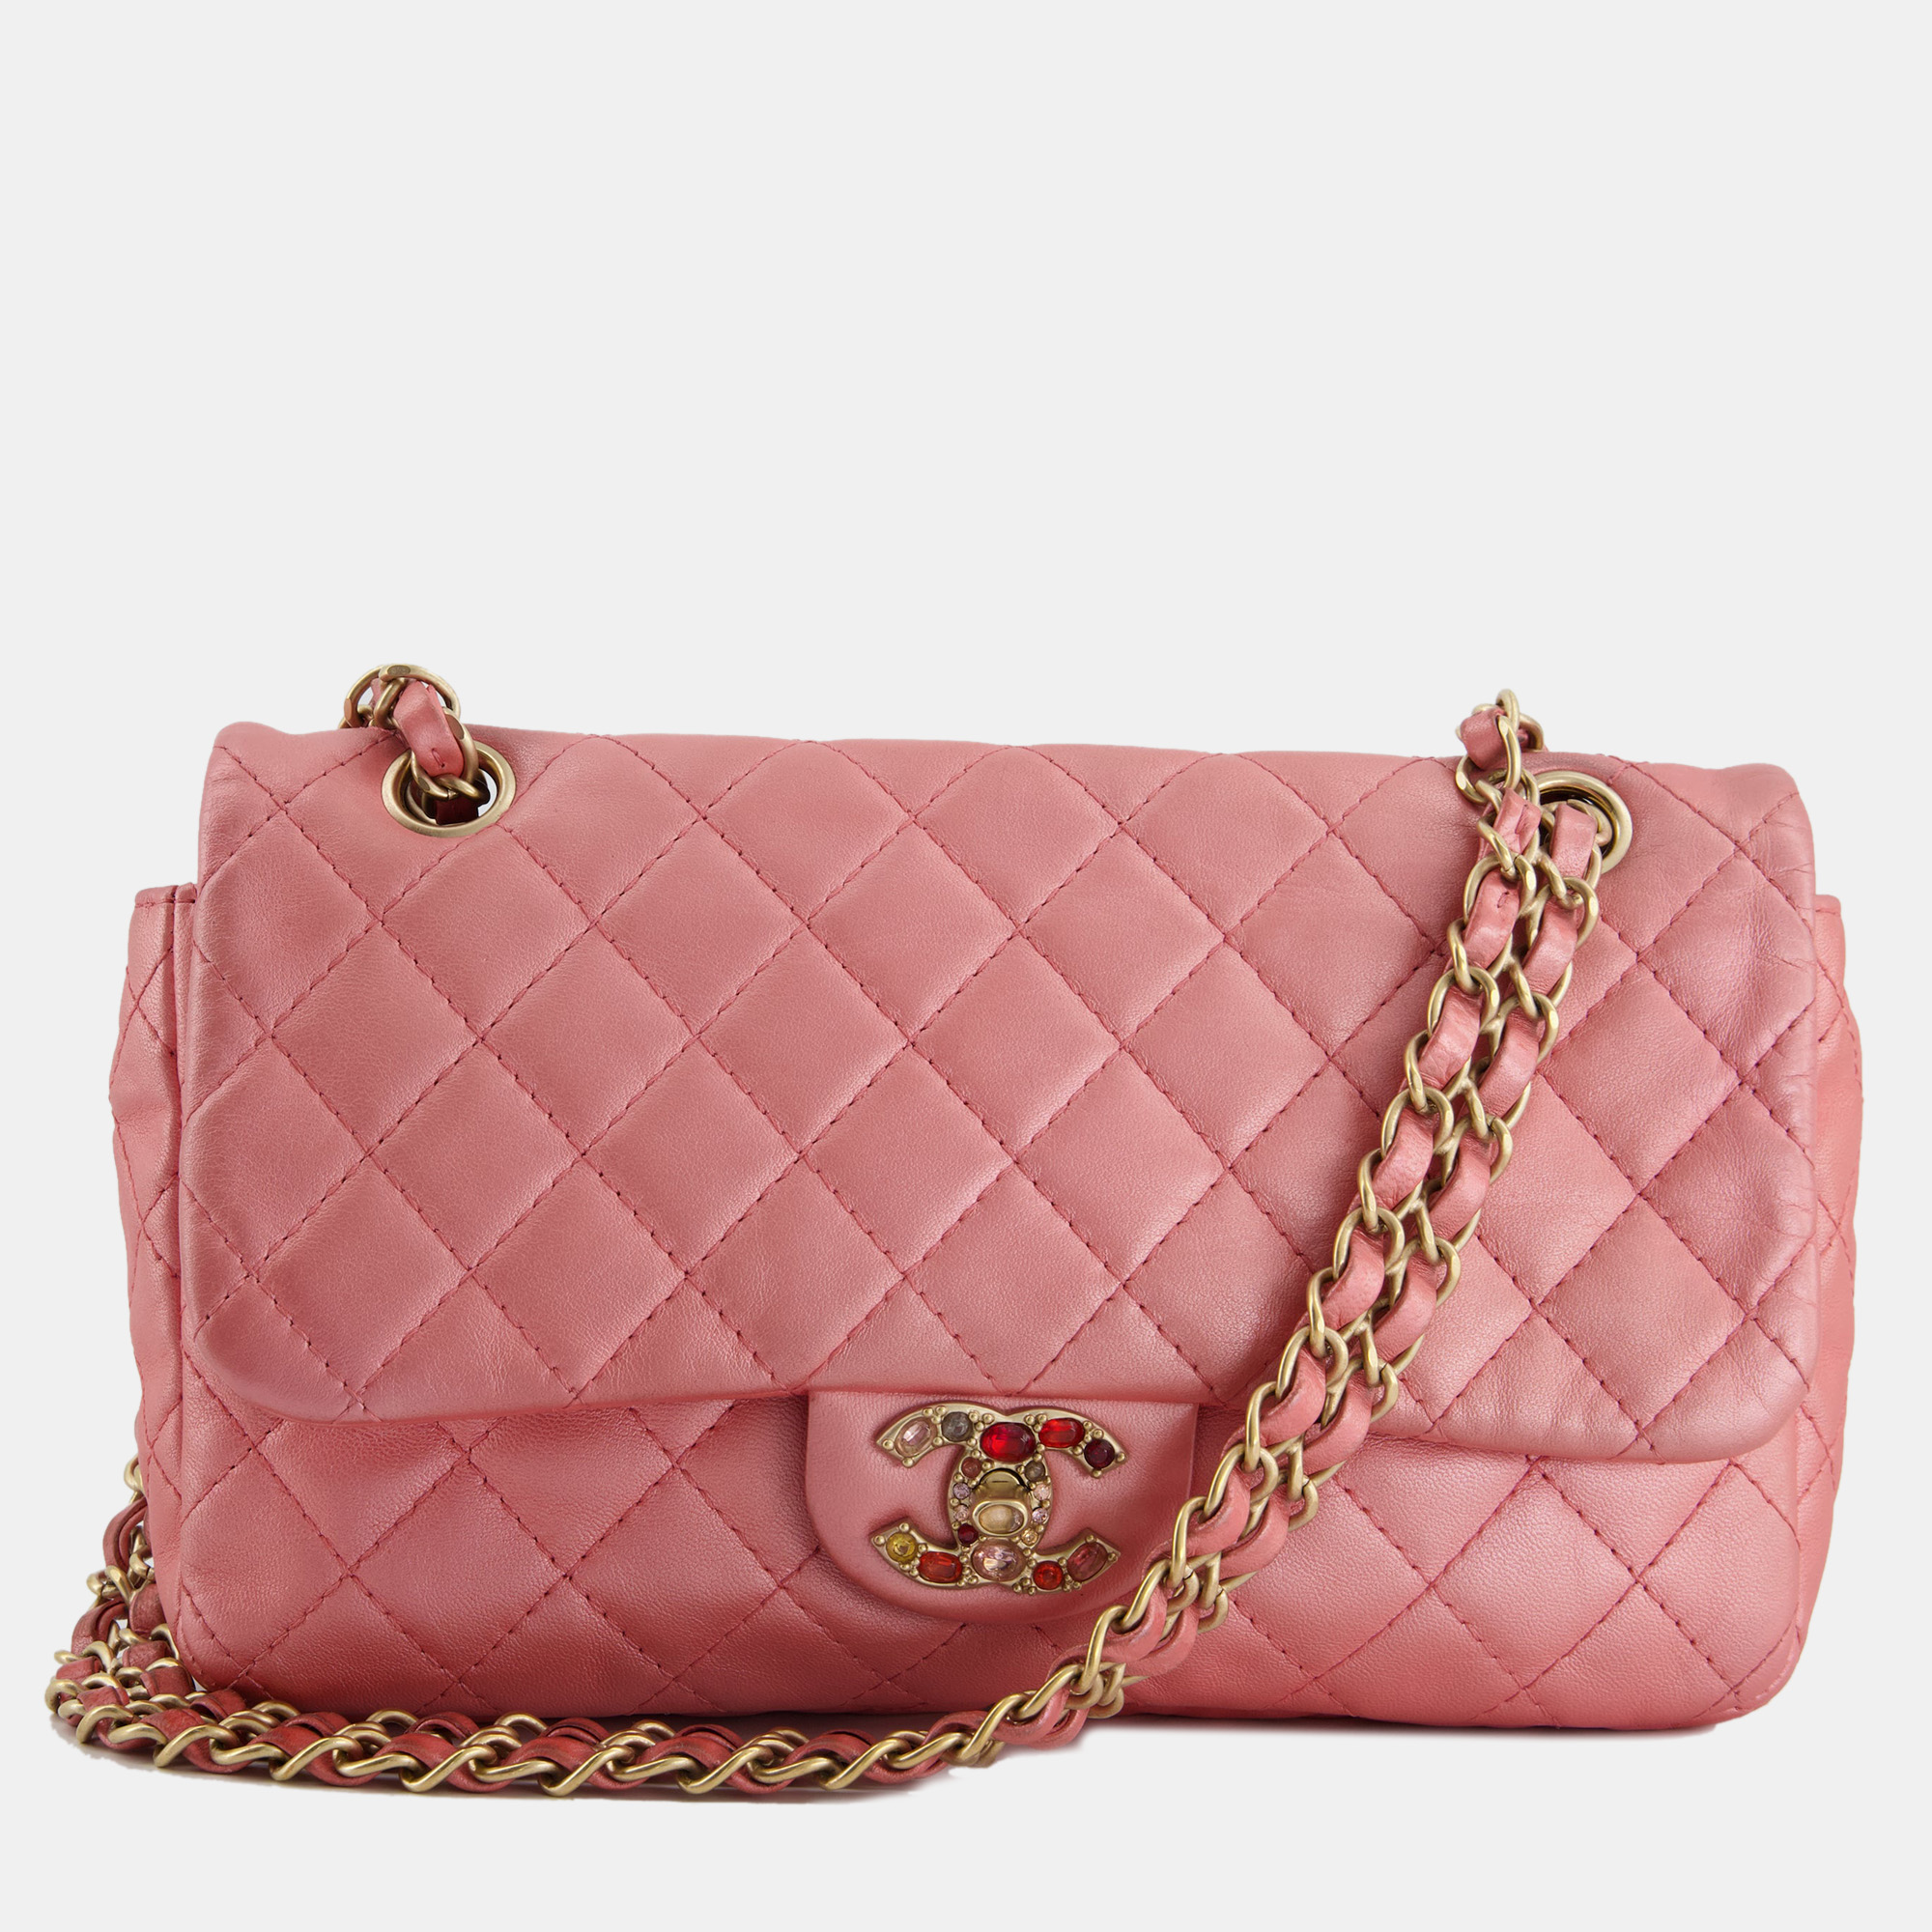 Chanel pink metallic single flap shoulder bag in lambskin leather with gold and precious stone hardware